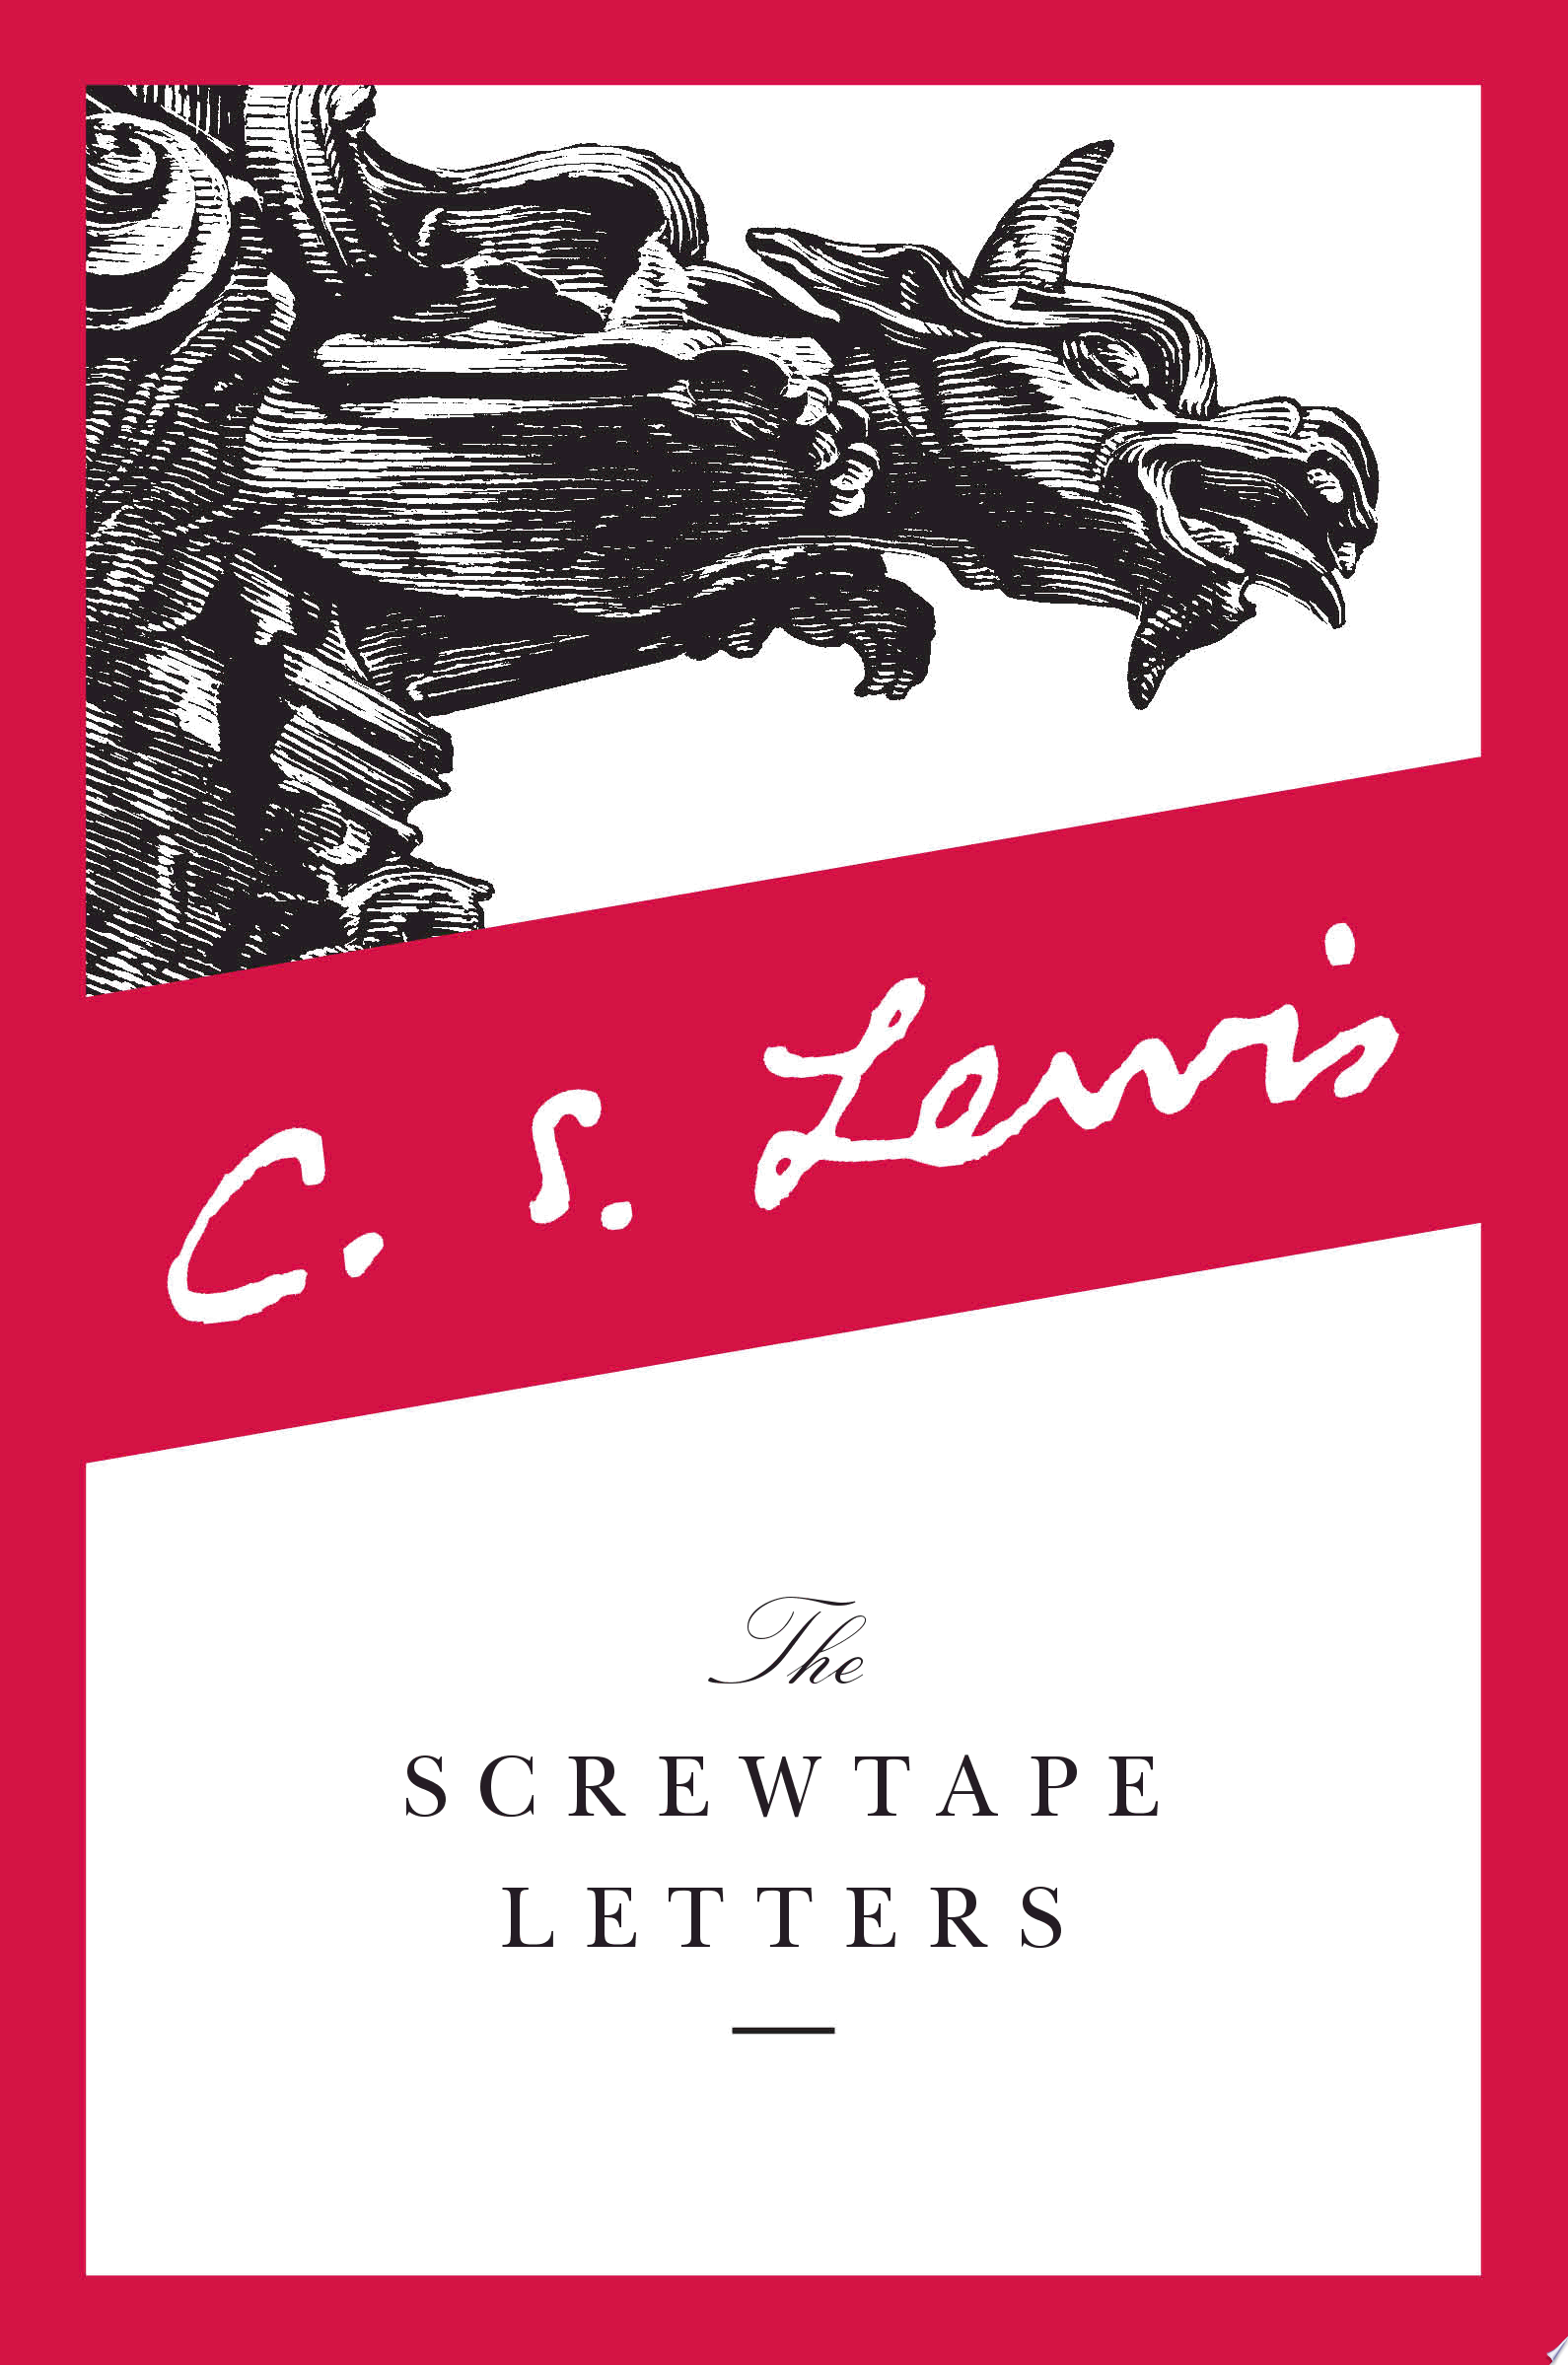 Image for "The Screwtape Letters"